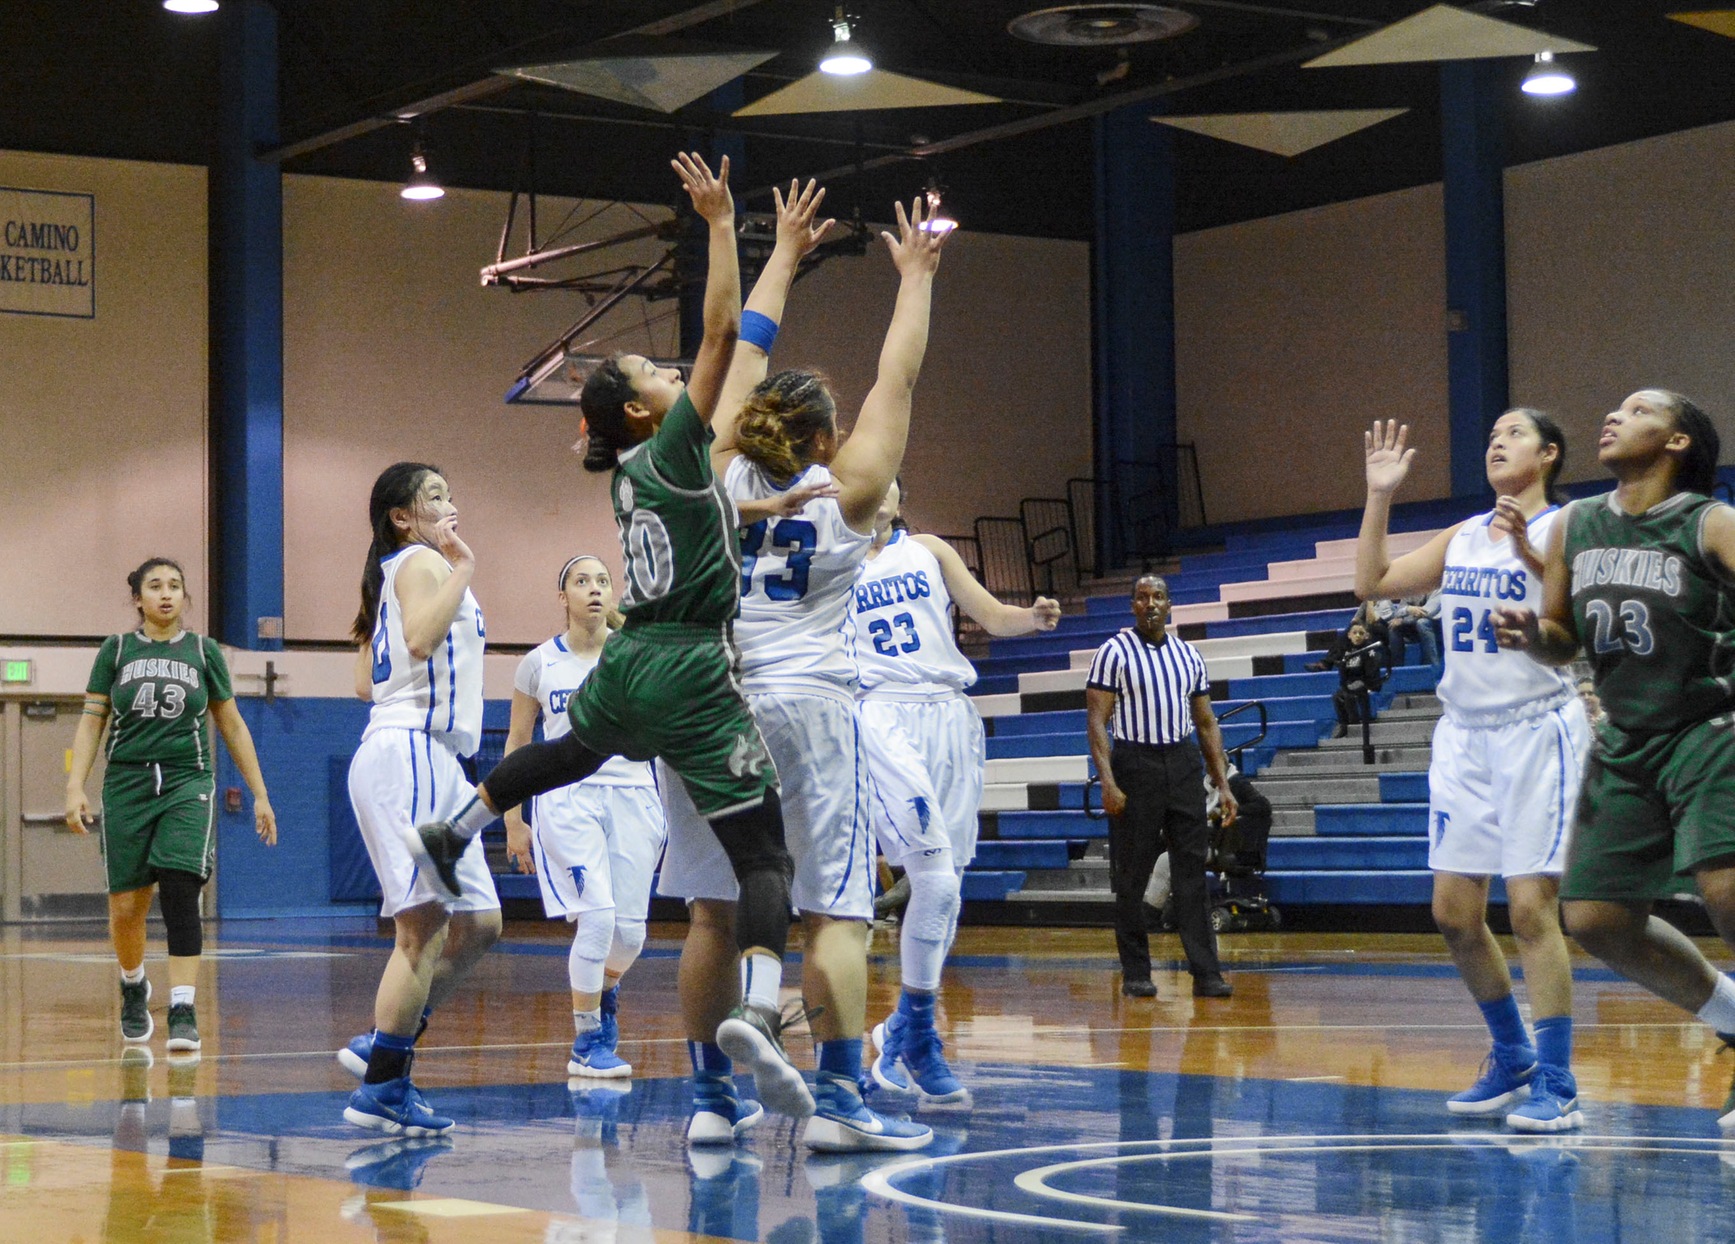 East Los Angeles College guard Jennifer Pool scores a jump shot in traffic in a 87-75 win over Cerritos College. (Photo by Tadzio Garcia)